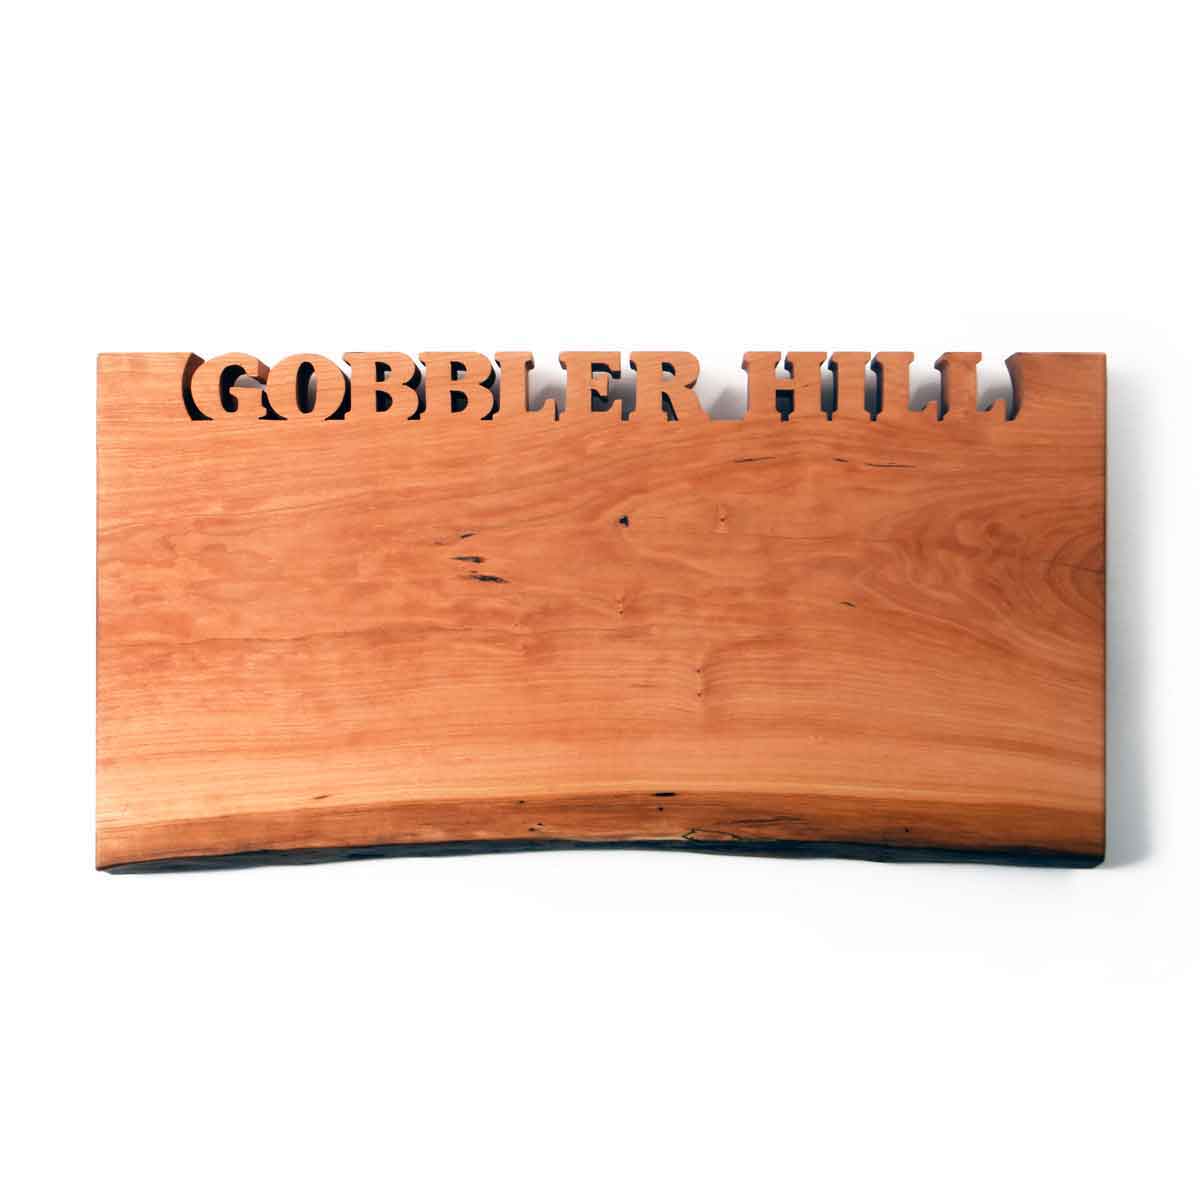 PERSONALIZED WOODEN CUTTING BOARD